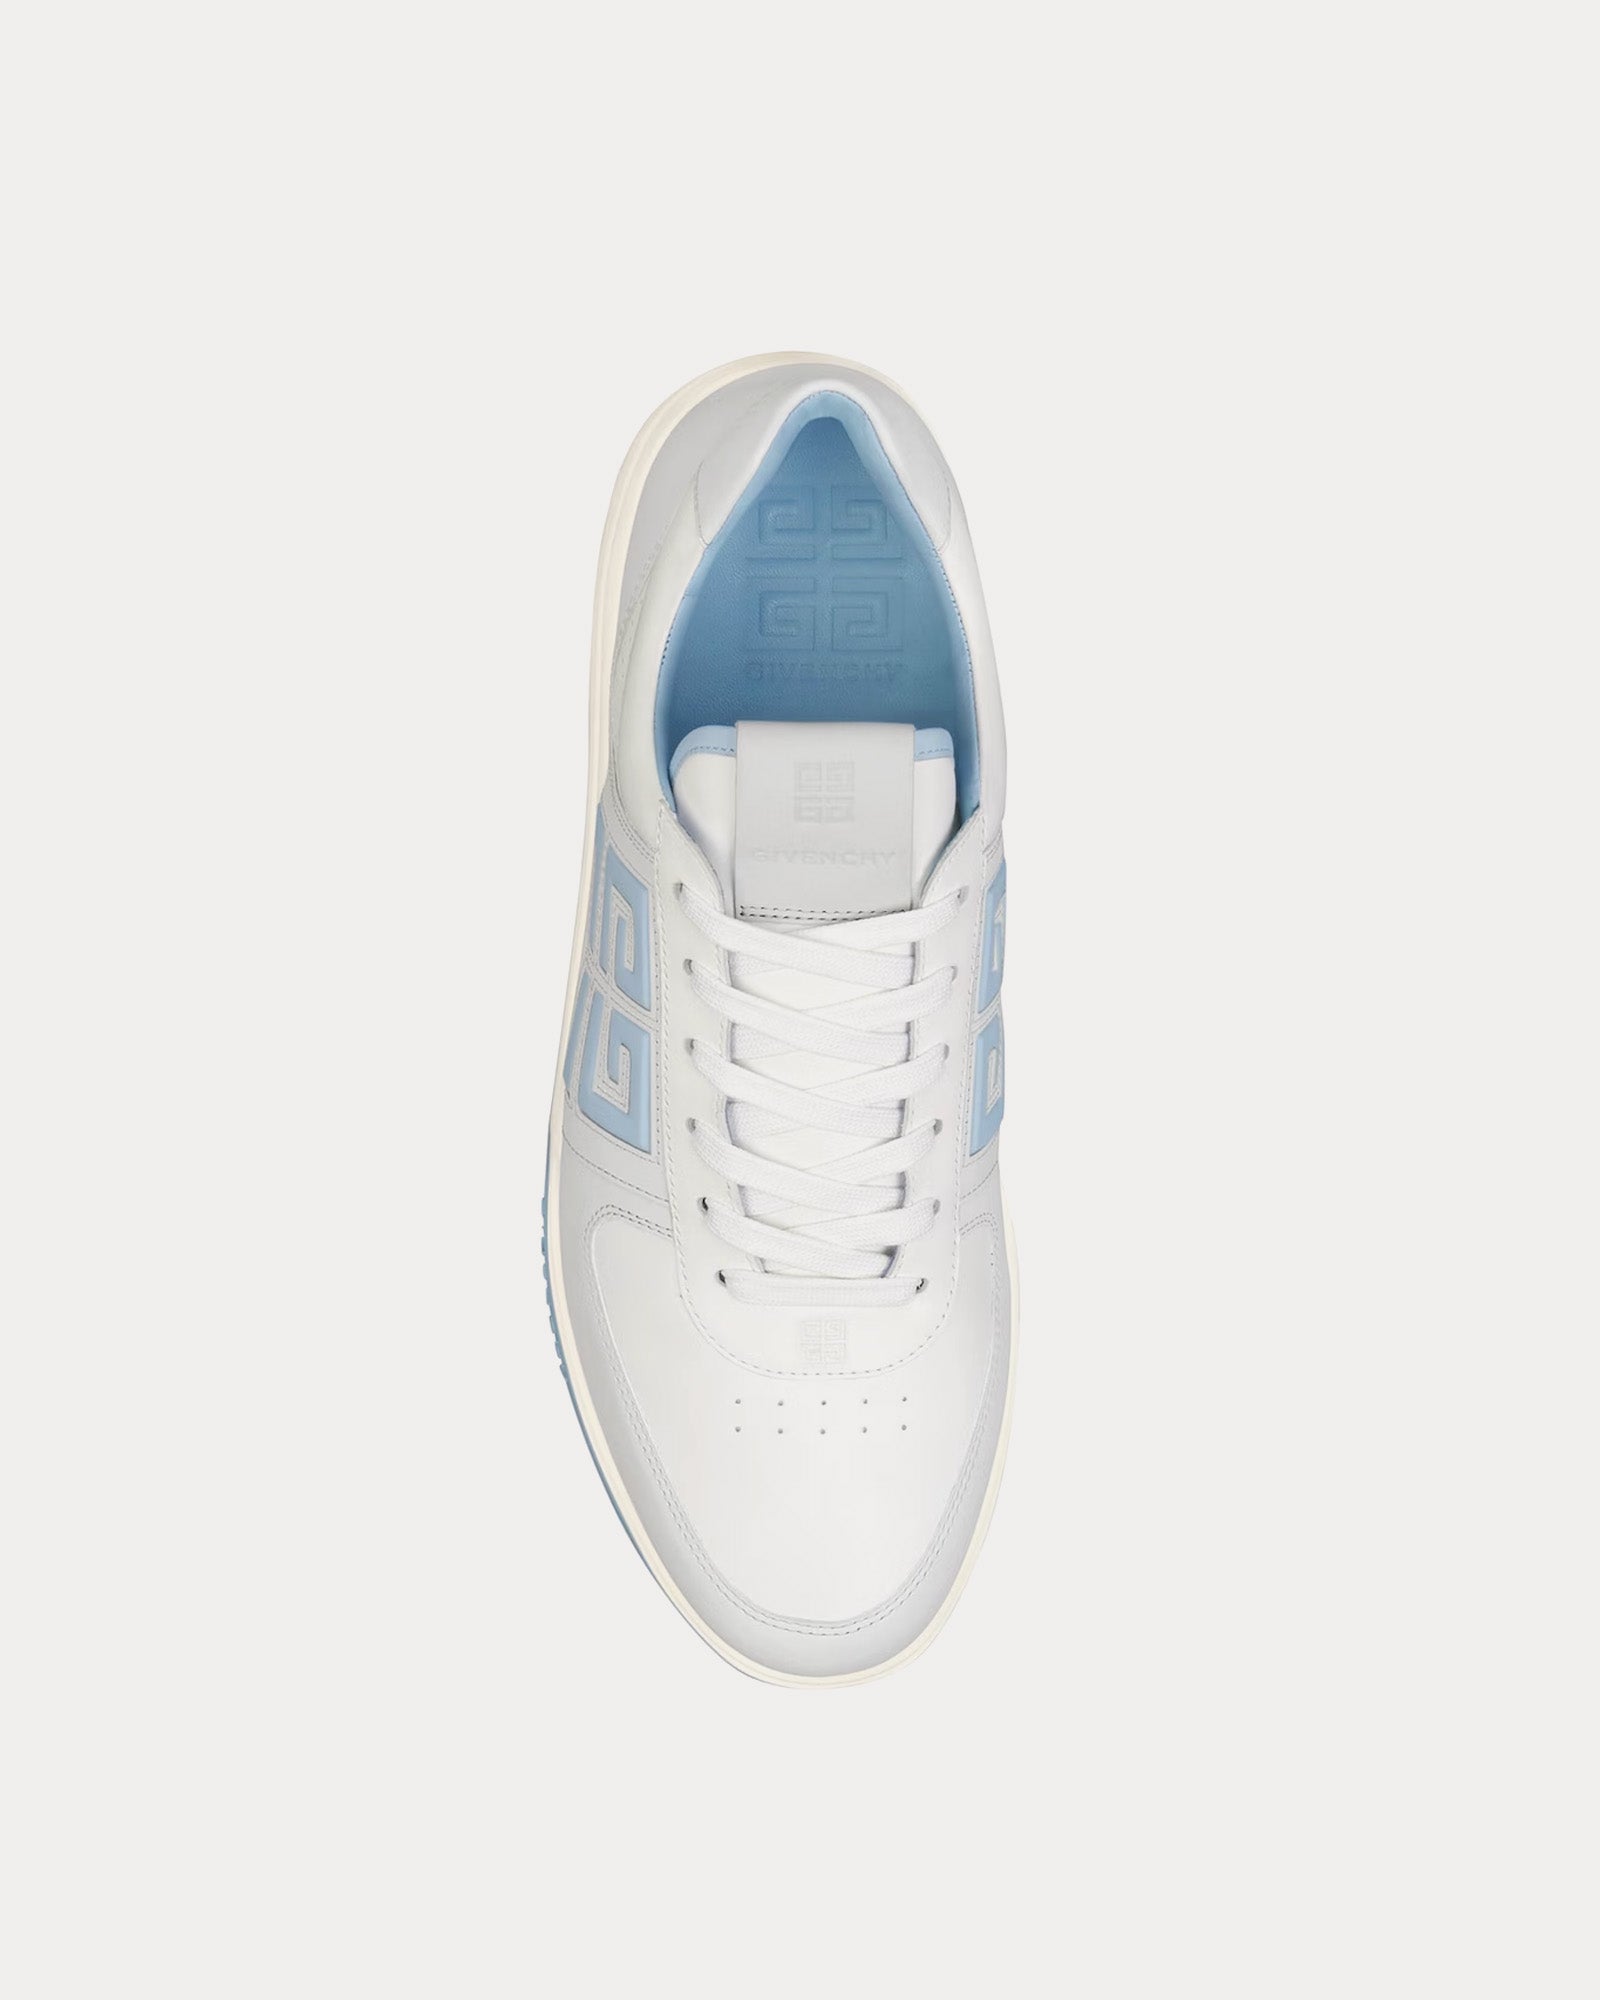 Givenchy - G4 Leather & Perforated Leather Grey / Blue Low Top Sneakers